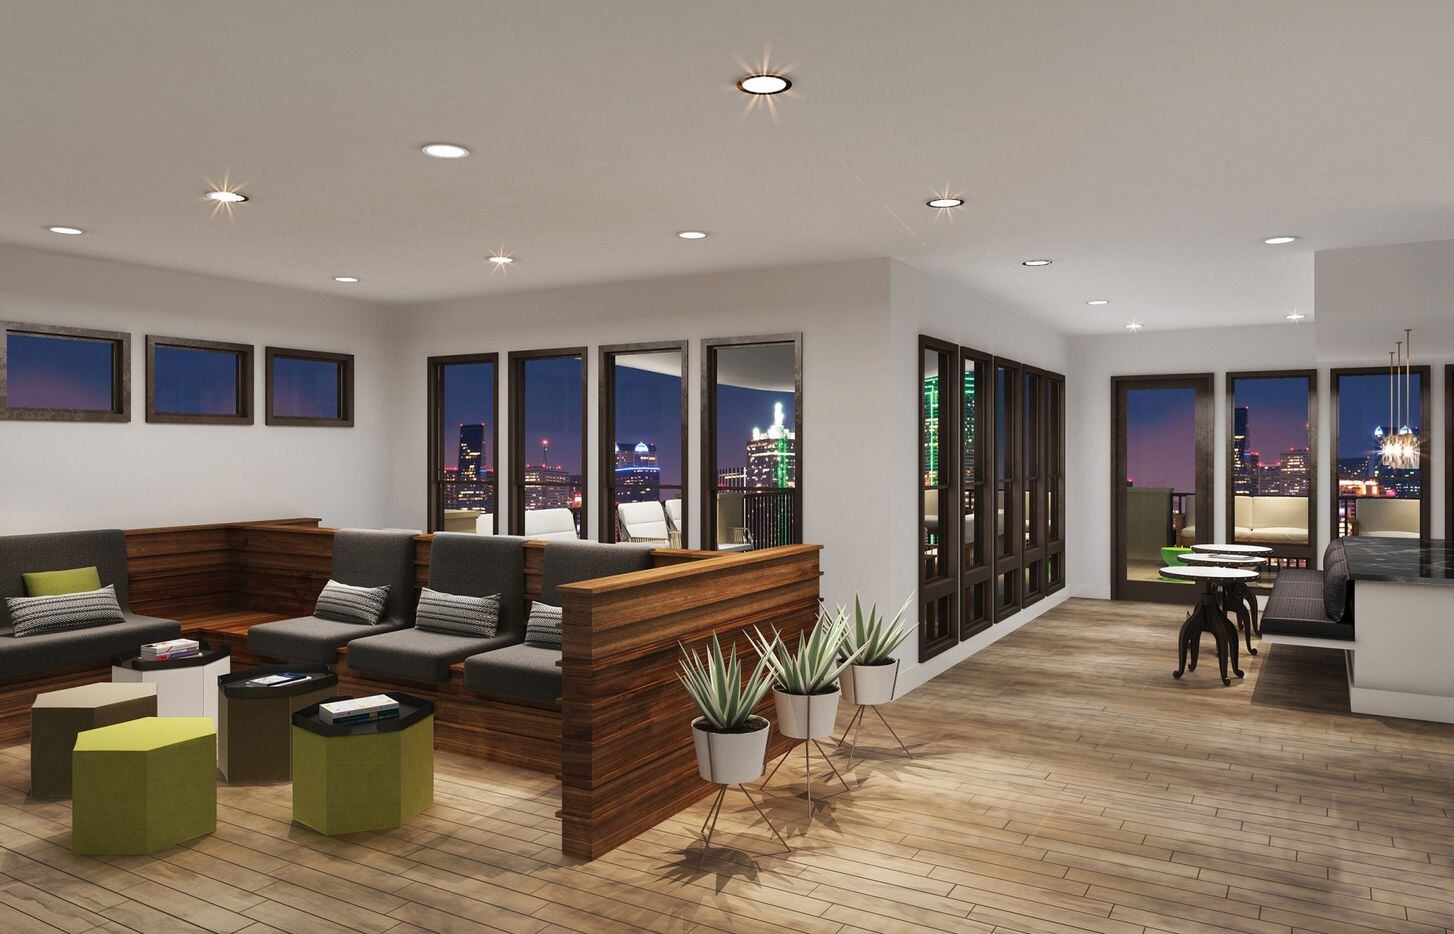 Rooftop lounge in the Alexan Riveredge apartments in the Design District.